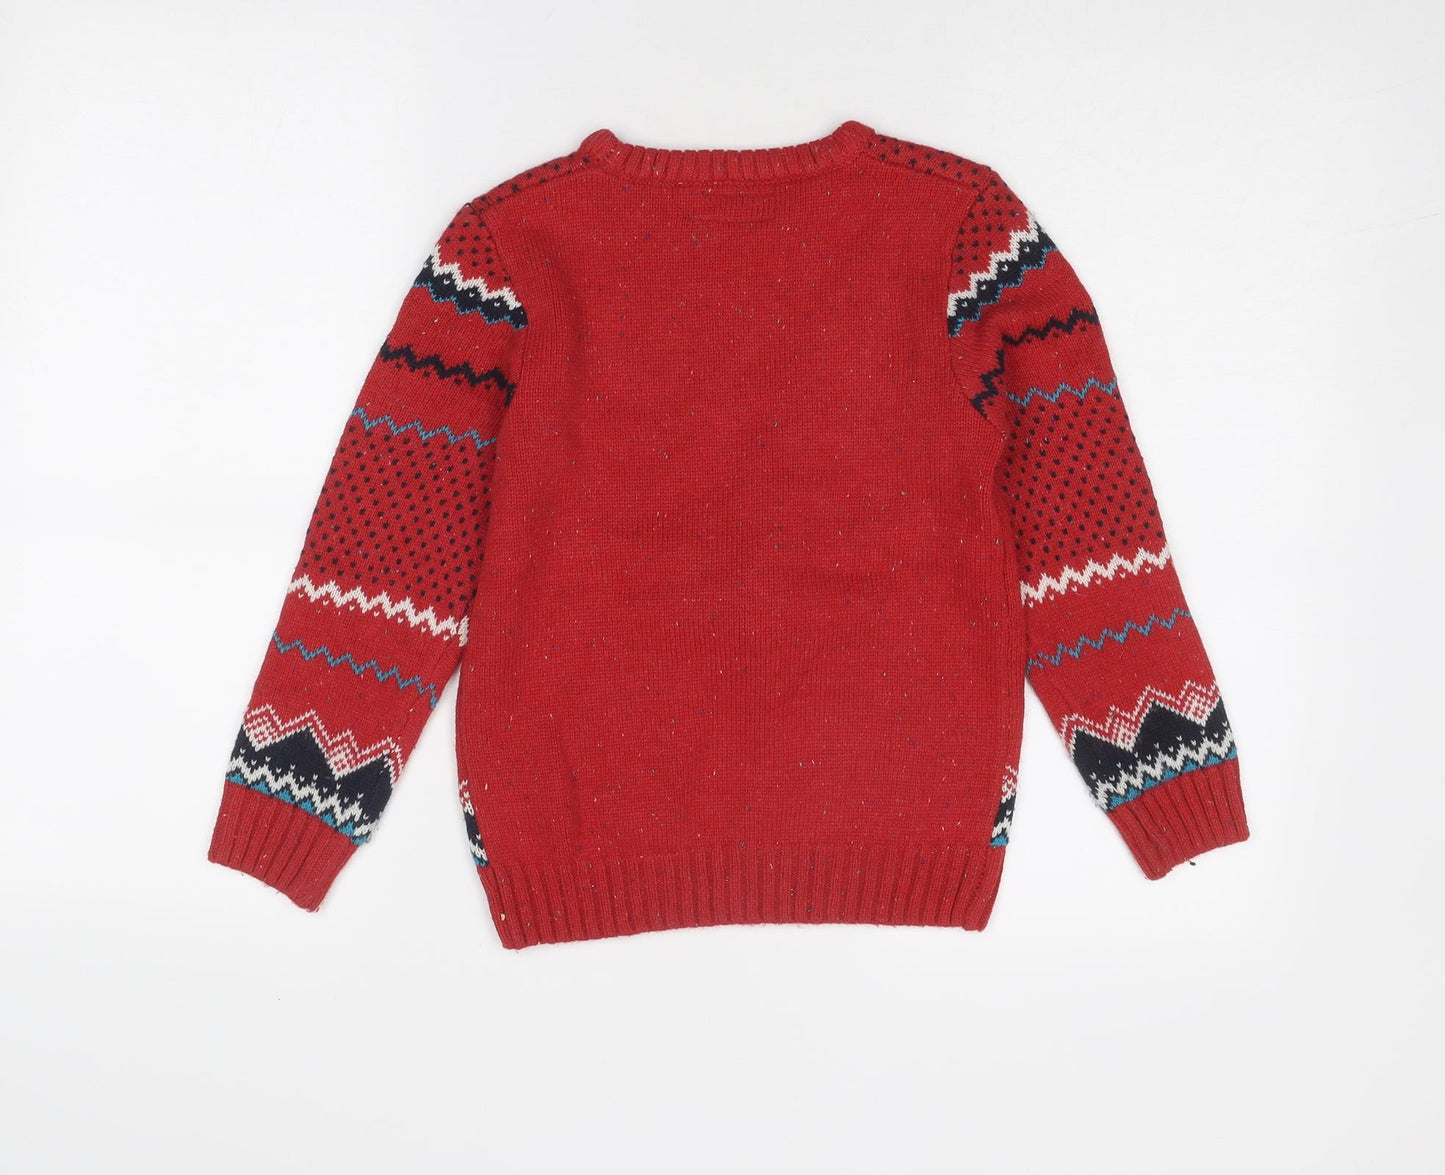 NEXT Boys Red Round Neck Acrylic Pullover Jumper Size 7 Years Pullover - Christmas Reindeer